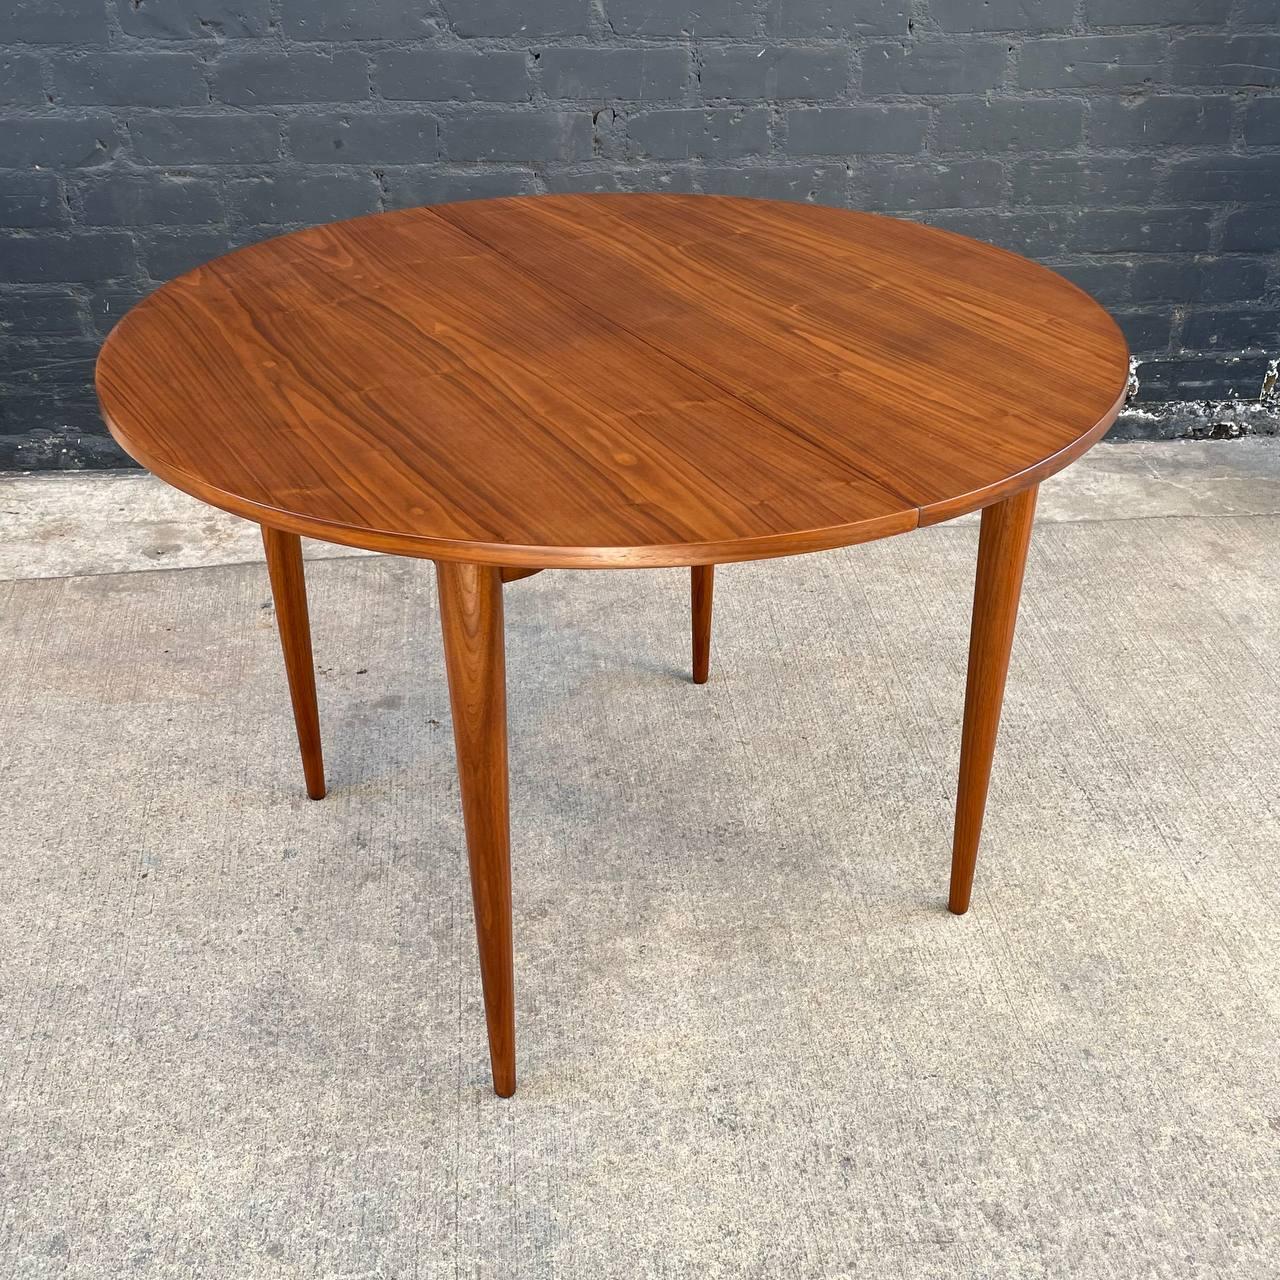 Mid-20th Century Newly Refinished - Expanding Mid-Century Modern Round Walnut Dining Table